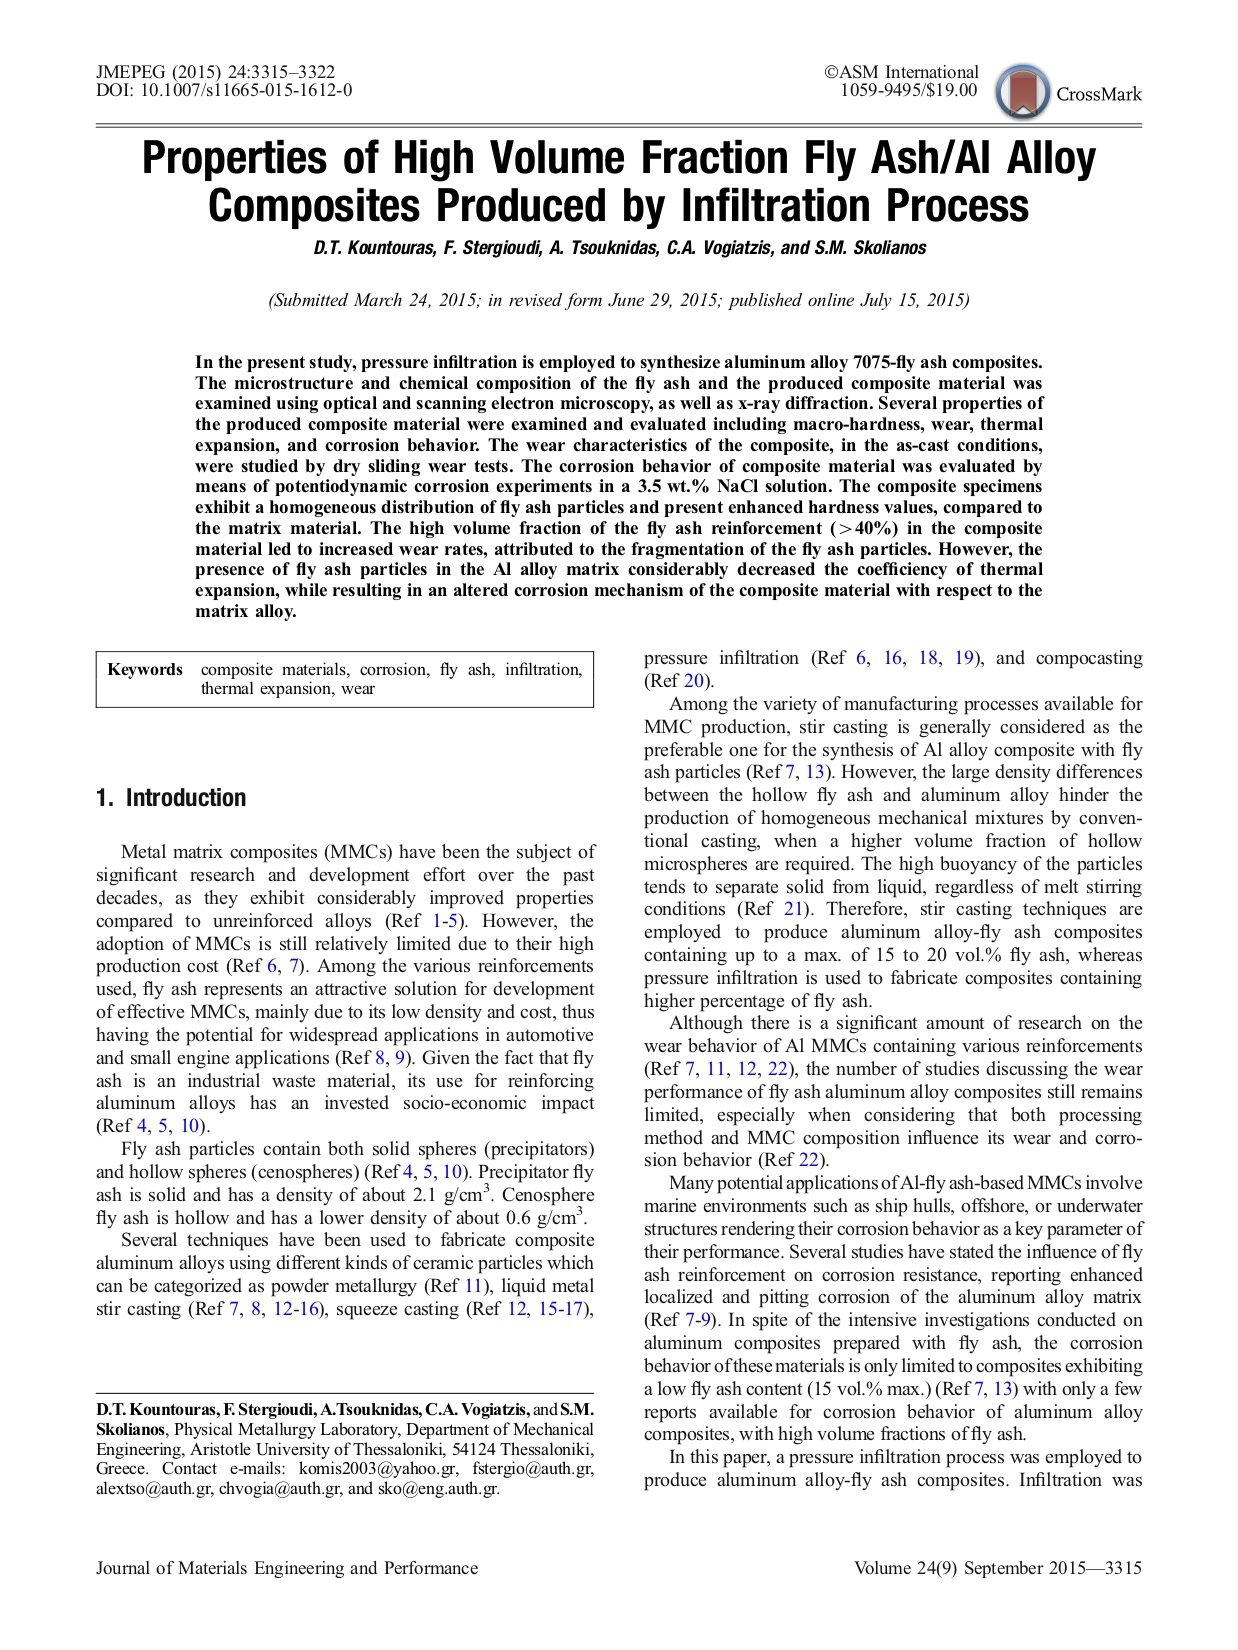 Properties of High Volume Fraction Fly Ash Al Alloy Composites Produced by Infiltration Process_page-0001.jpg